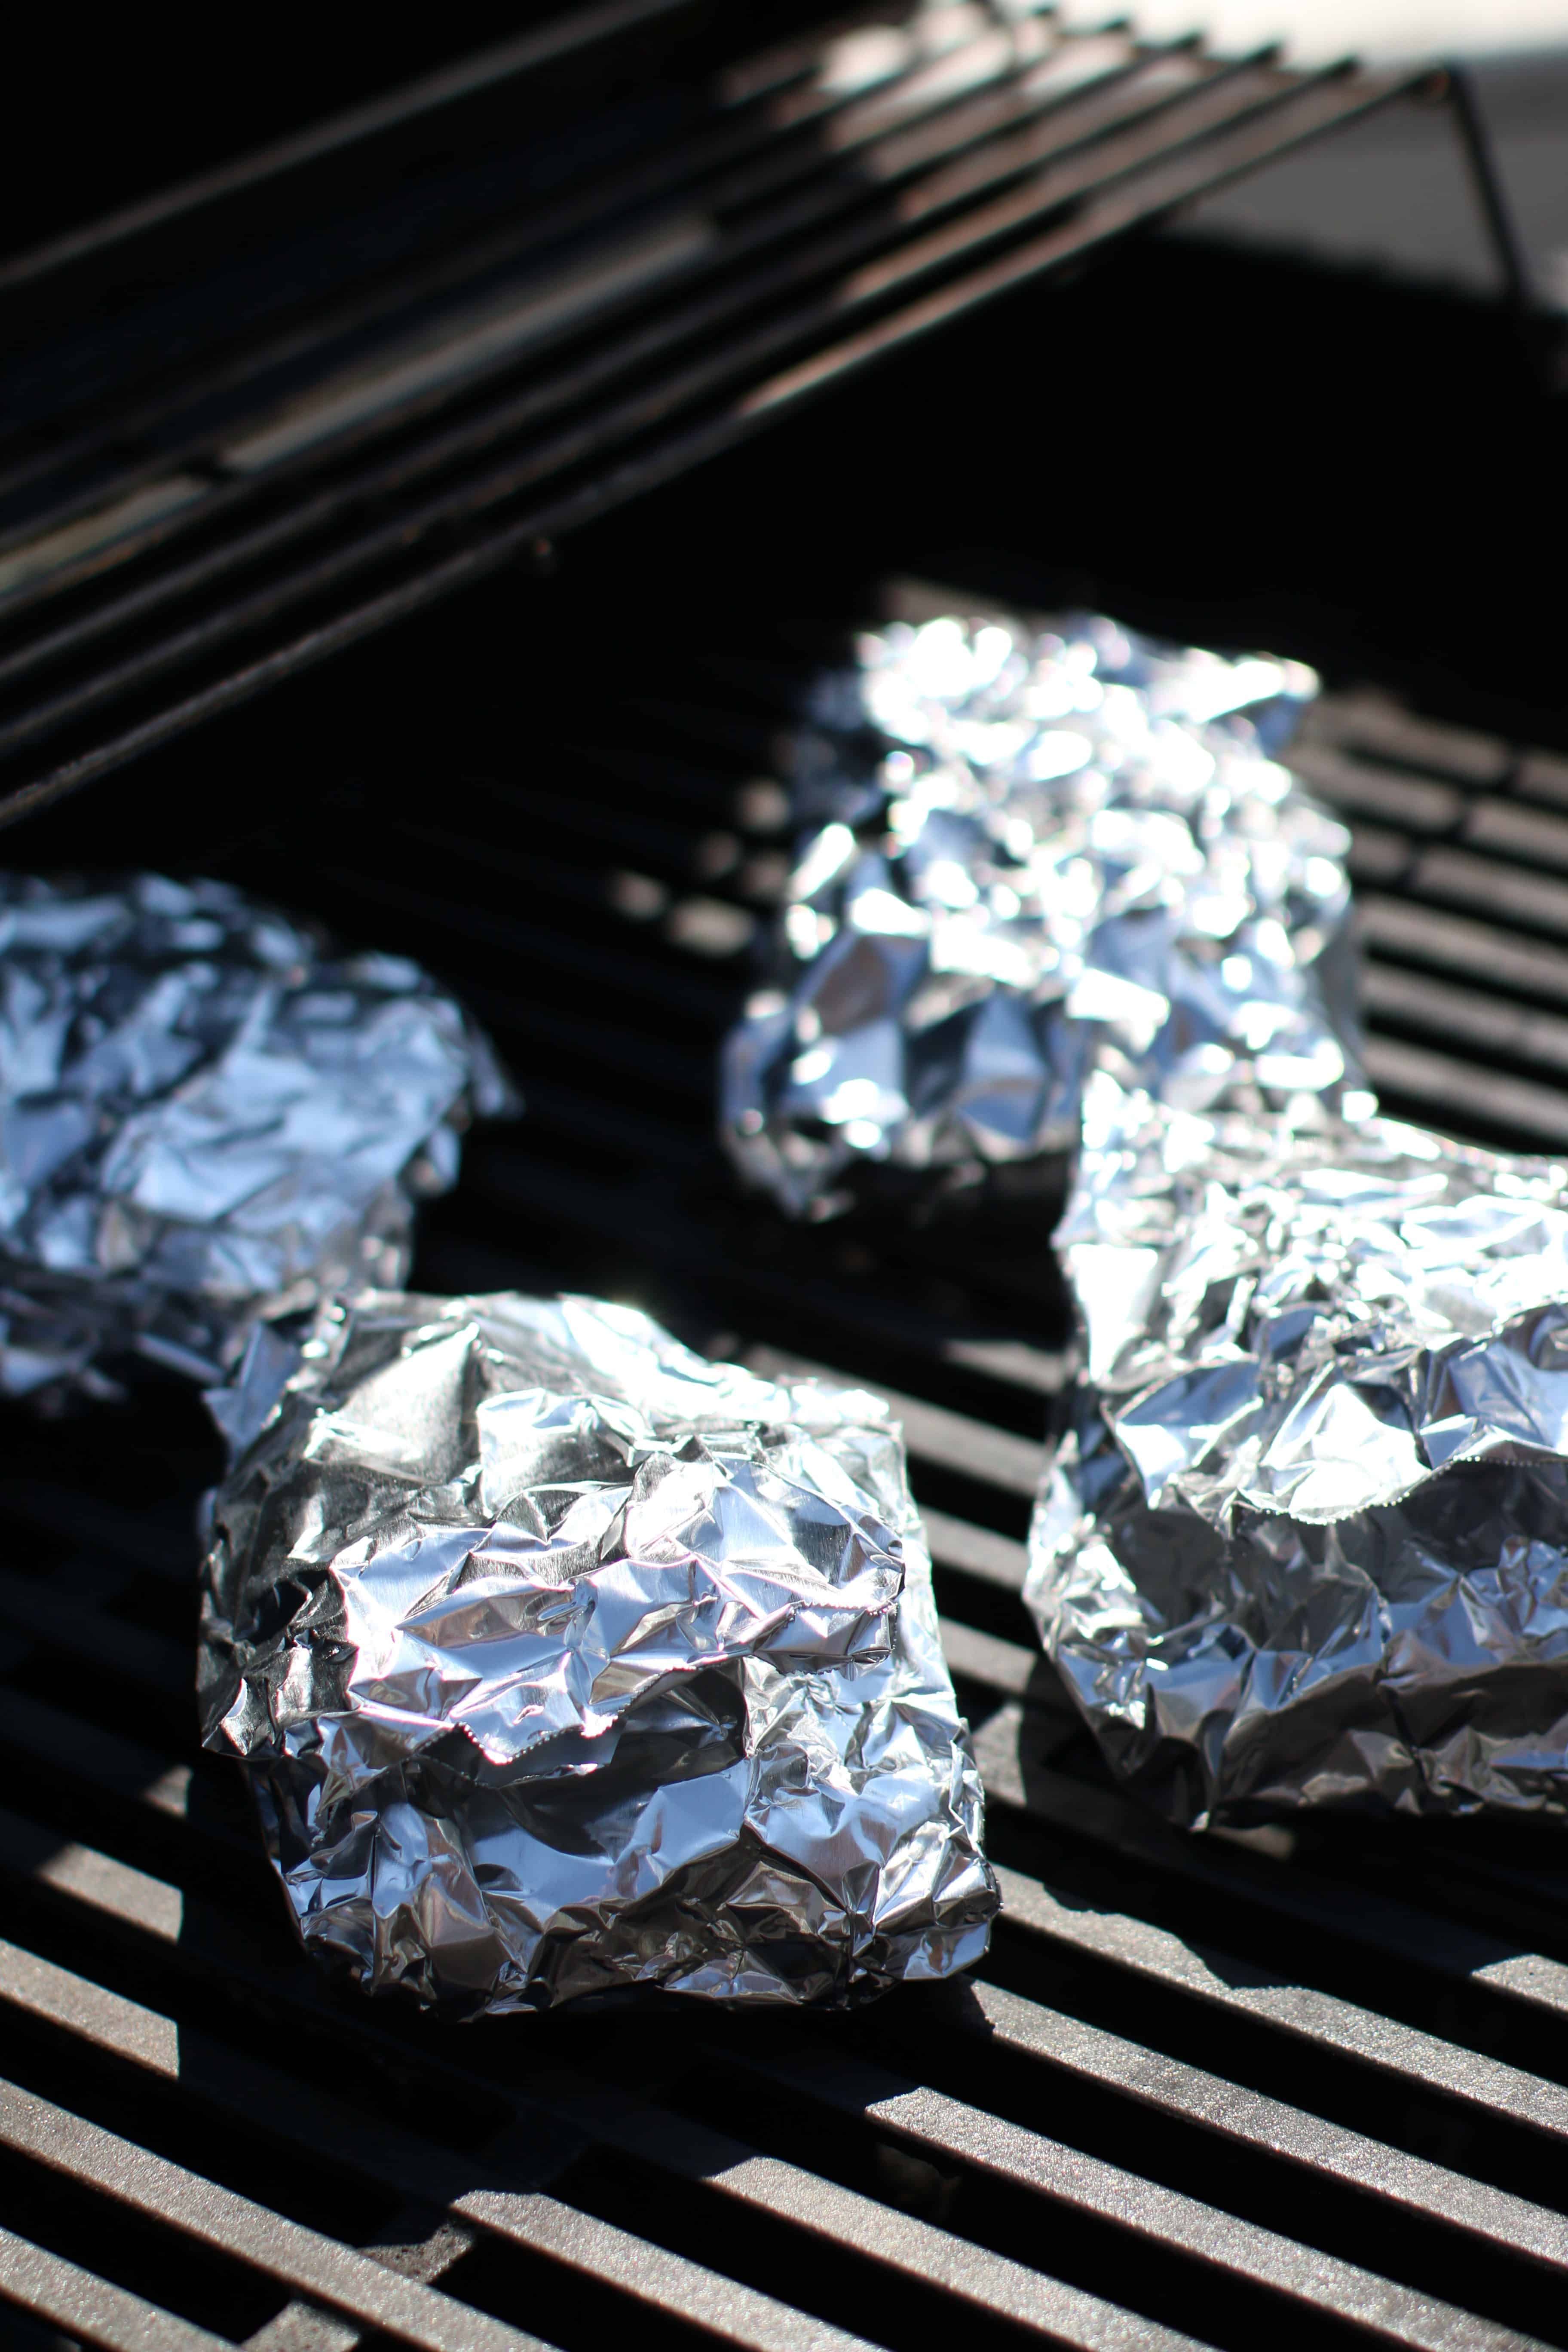 aluminum foil packets on grill.